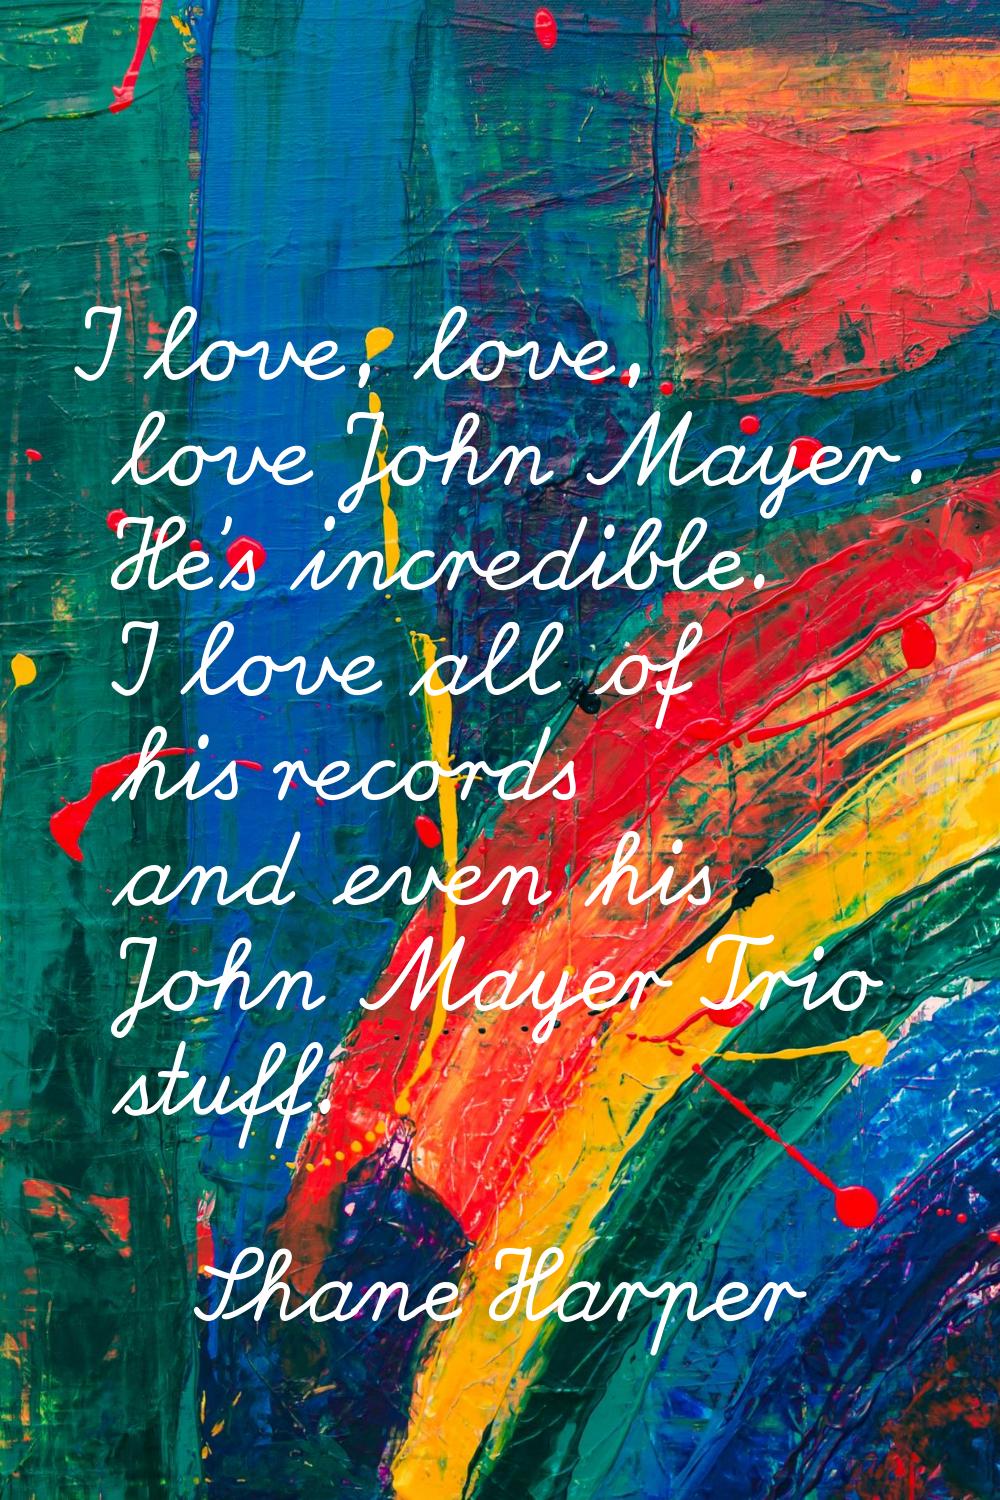 I love, love, love John Mayer. He's incredible. I love all of his records and even his John Mayer T